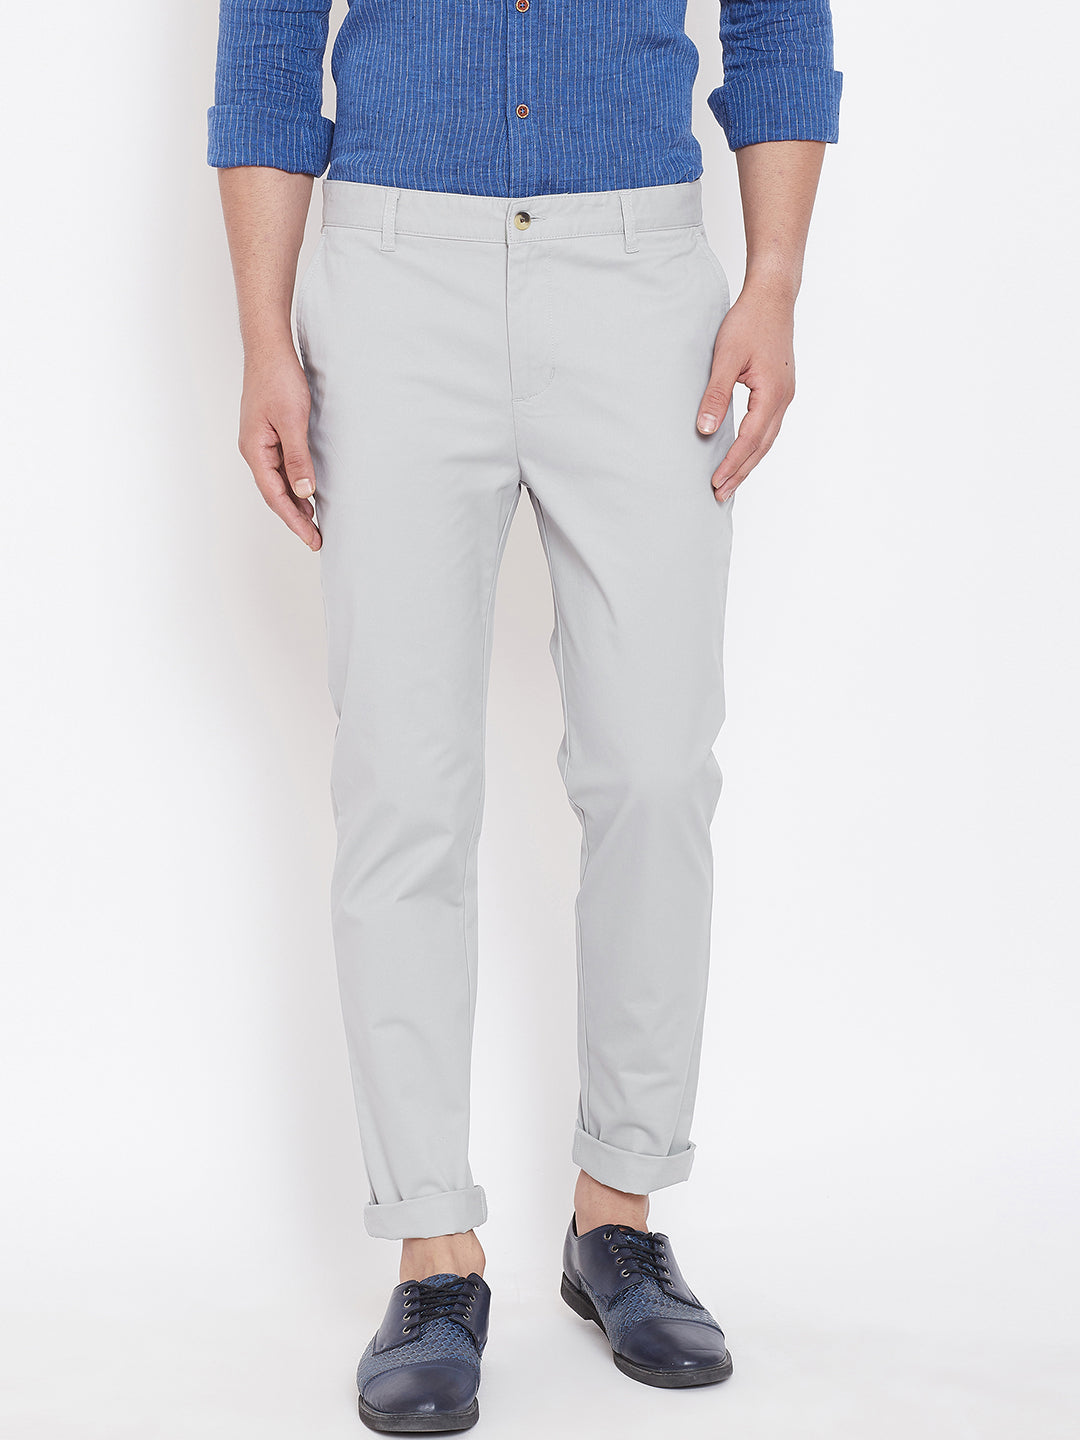 Men's Grey Stretch Washed Casual Tailored Fit Chinos